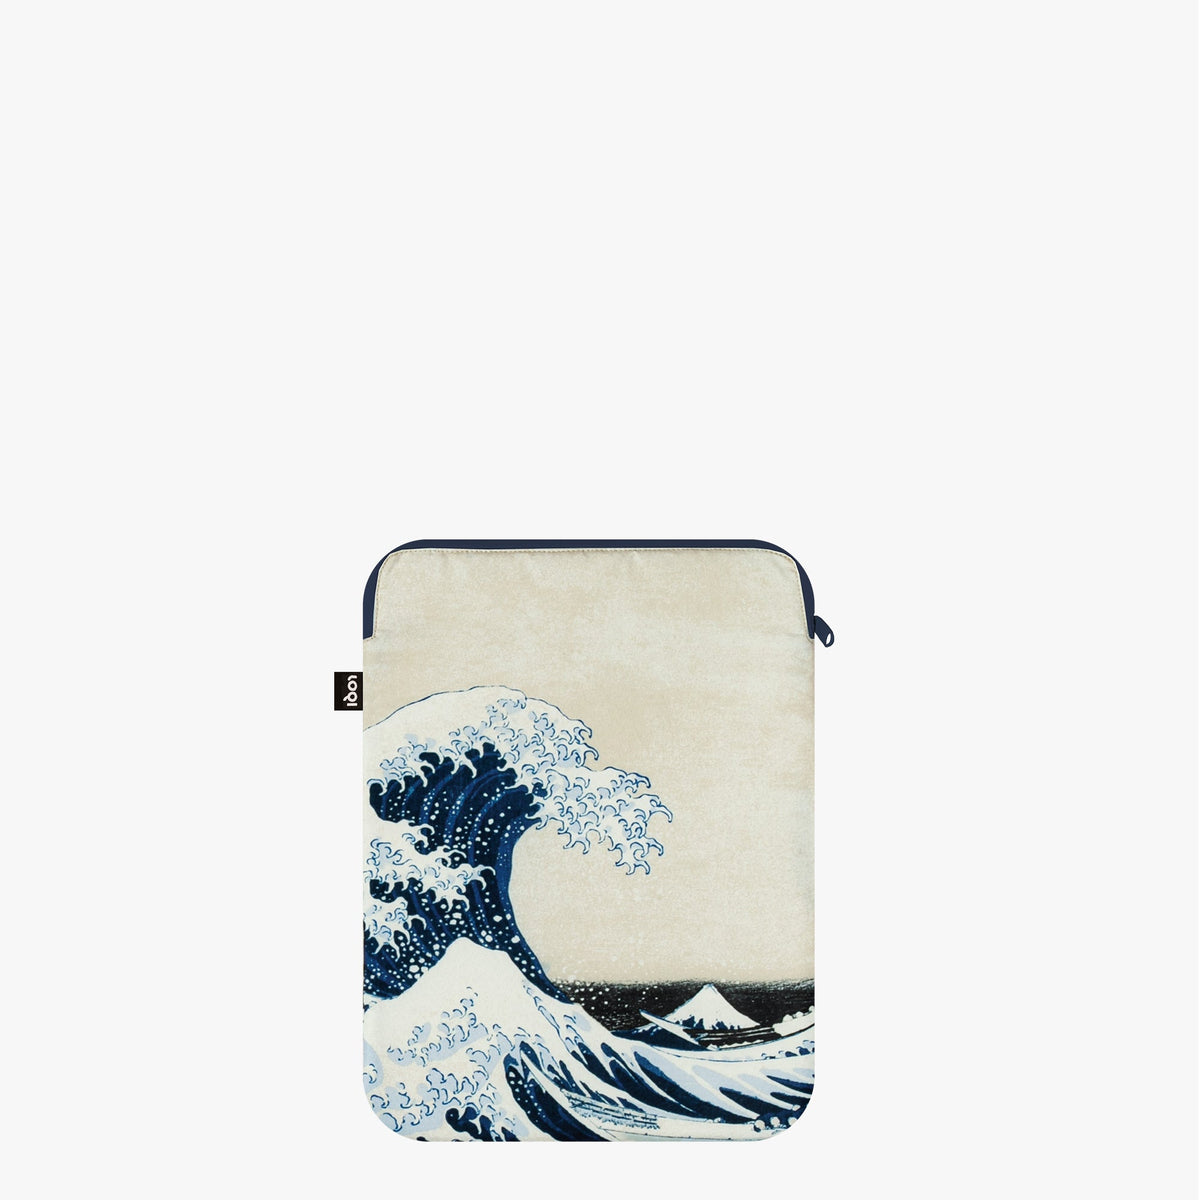 The Great Wave Recycled Laptop Sleeve 24 x 33 cm